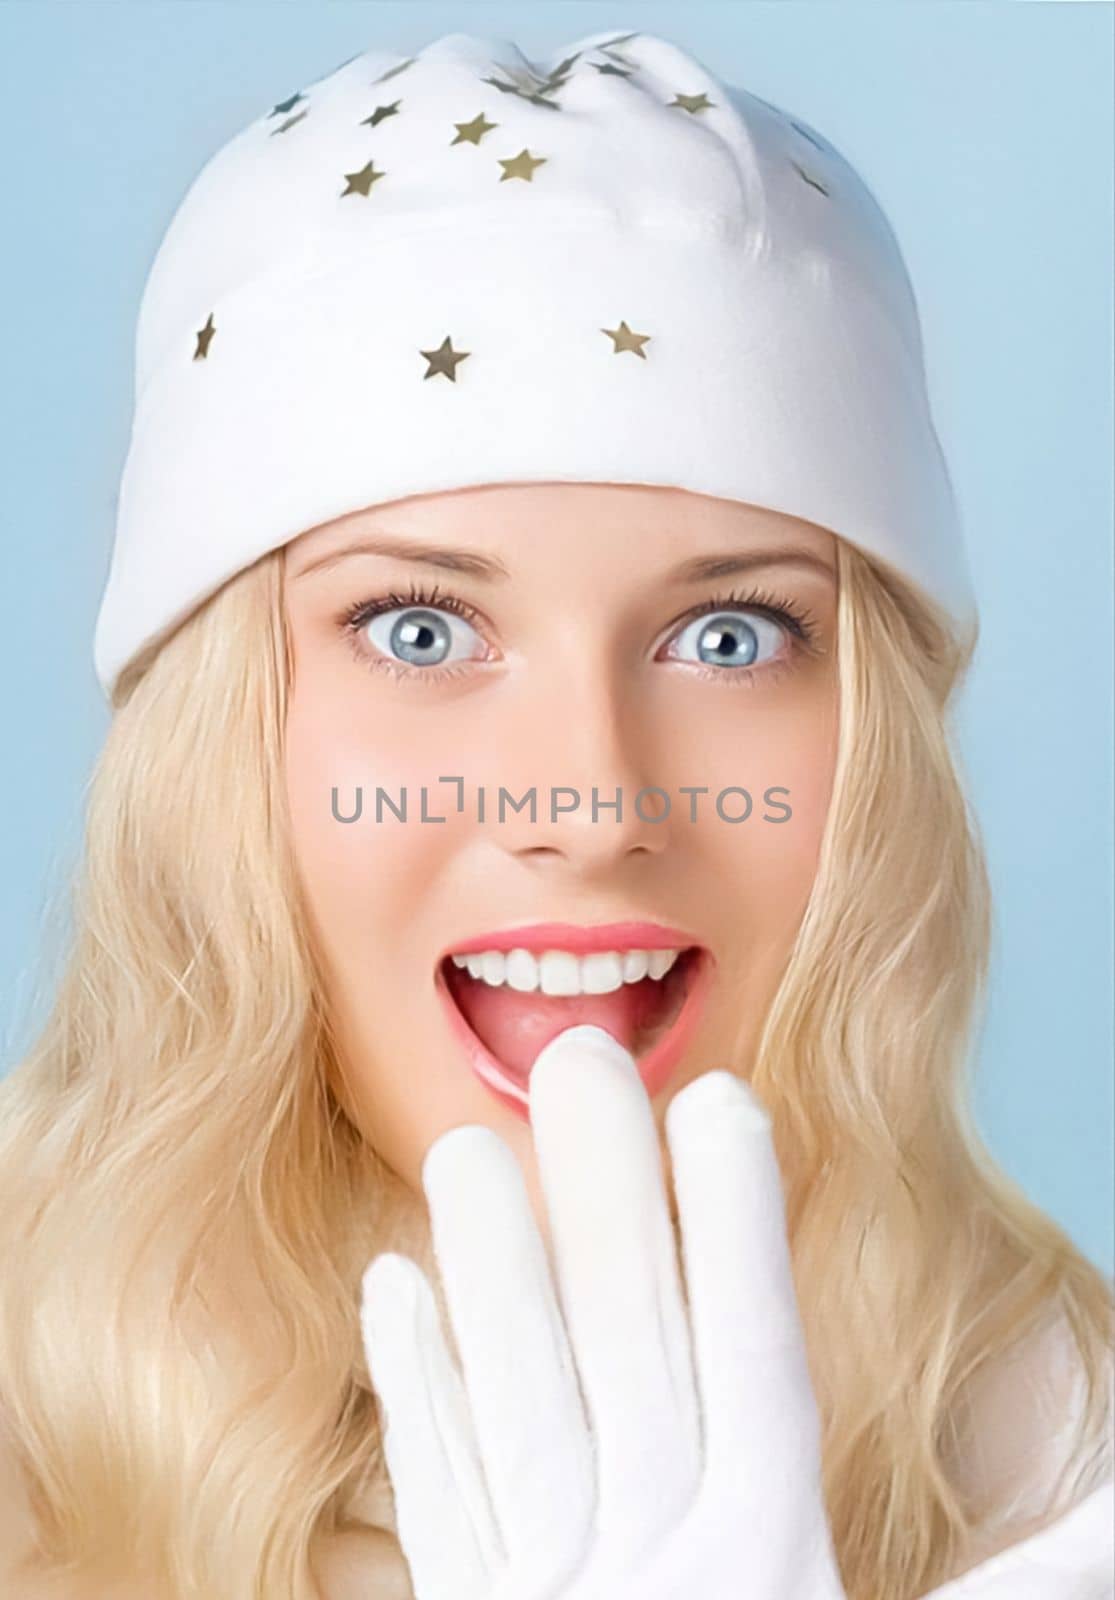 Girl with blond hair and blue eyes seems surprised and amused while smiling and enjoying the winter holiday season lifestyle by Anneleven